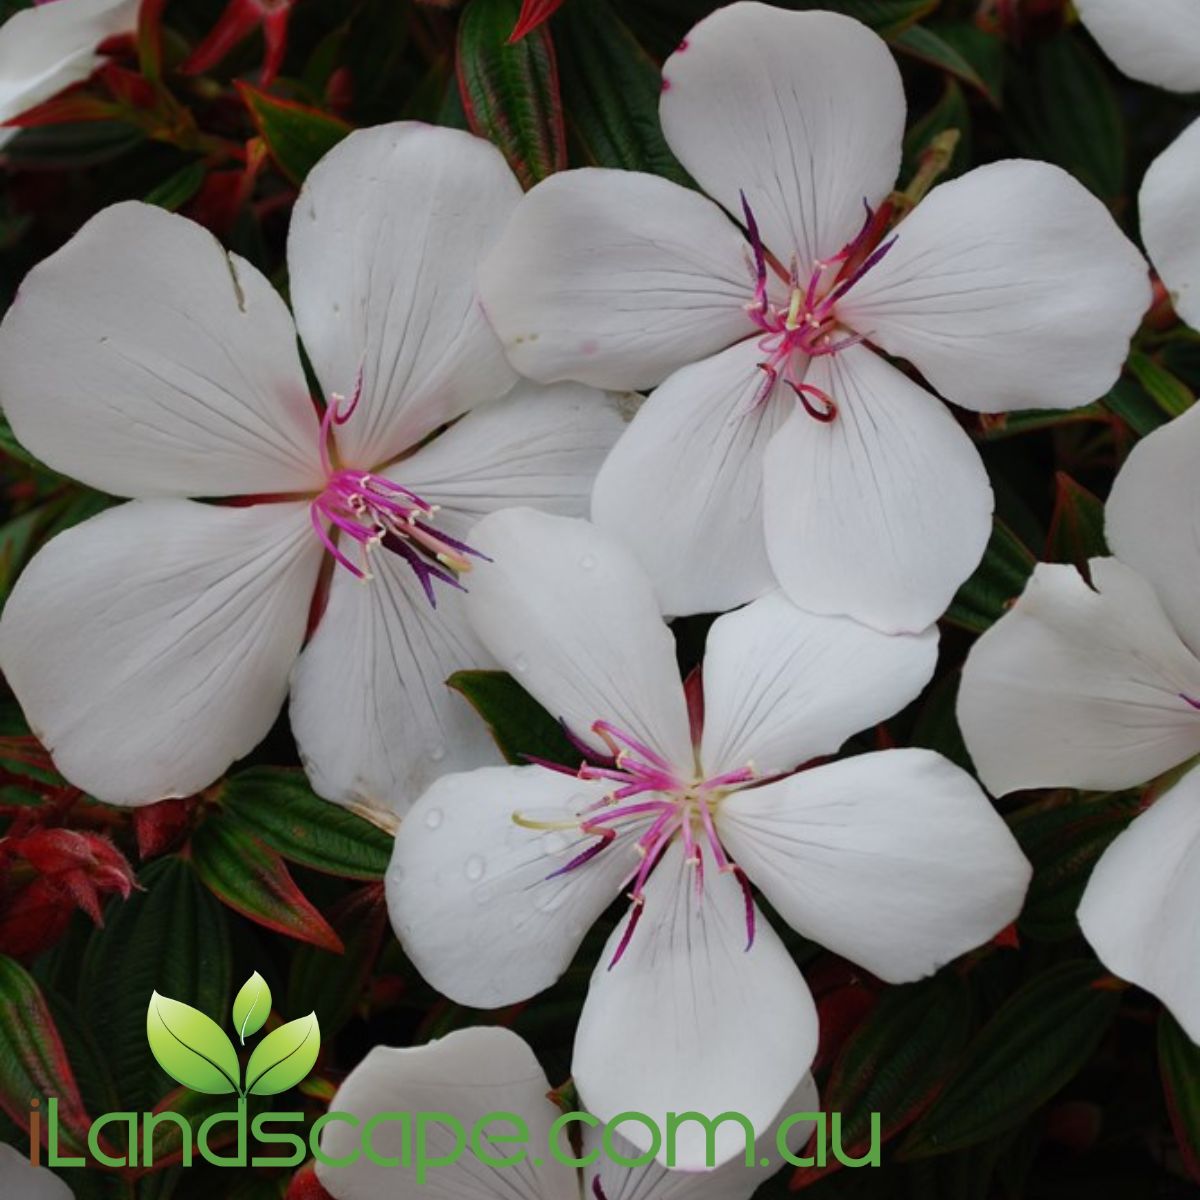 Tibouchina Peace Baby is a compact form of tibouchina that grows around 60cm High x 80cm Wide and produces Pure white flowers and vibrant pink stamens   Grows in Both Full Sun to Part Shade 